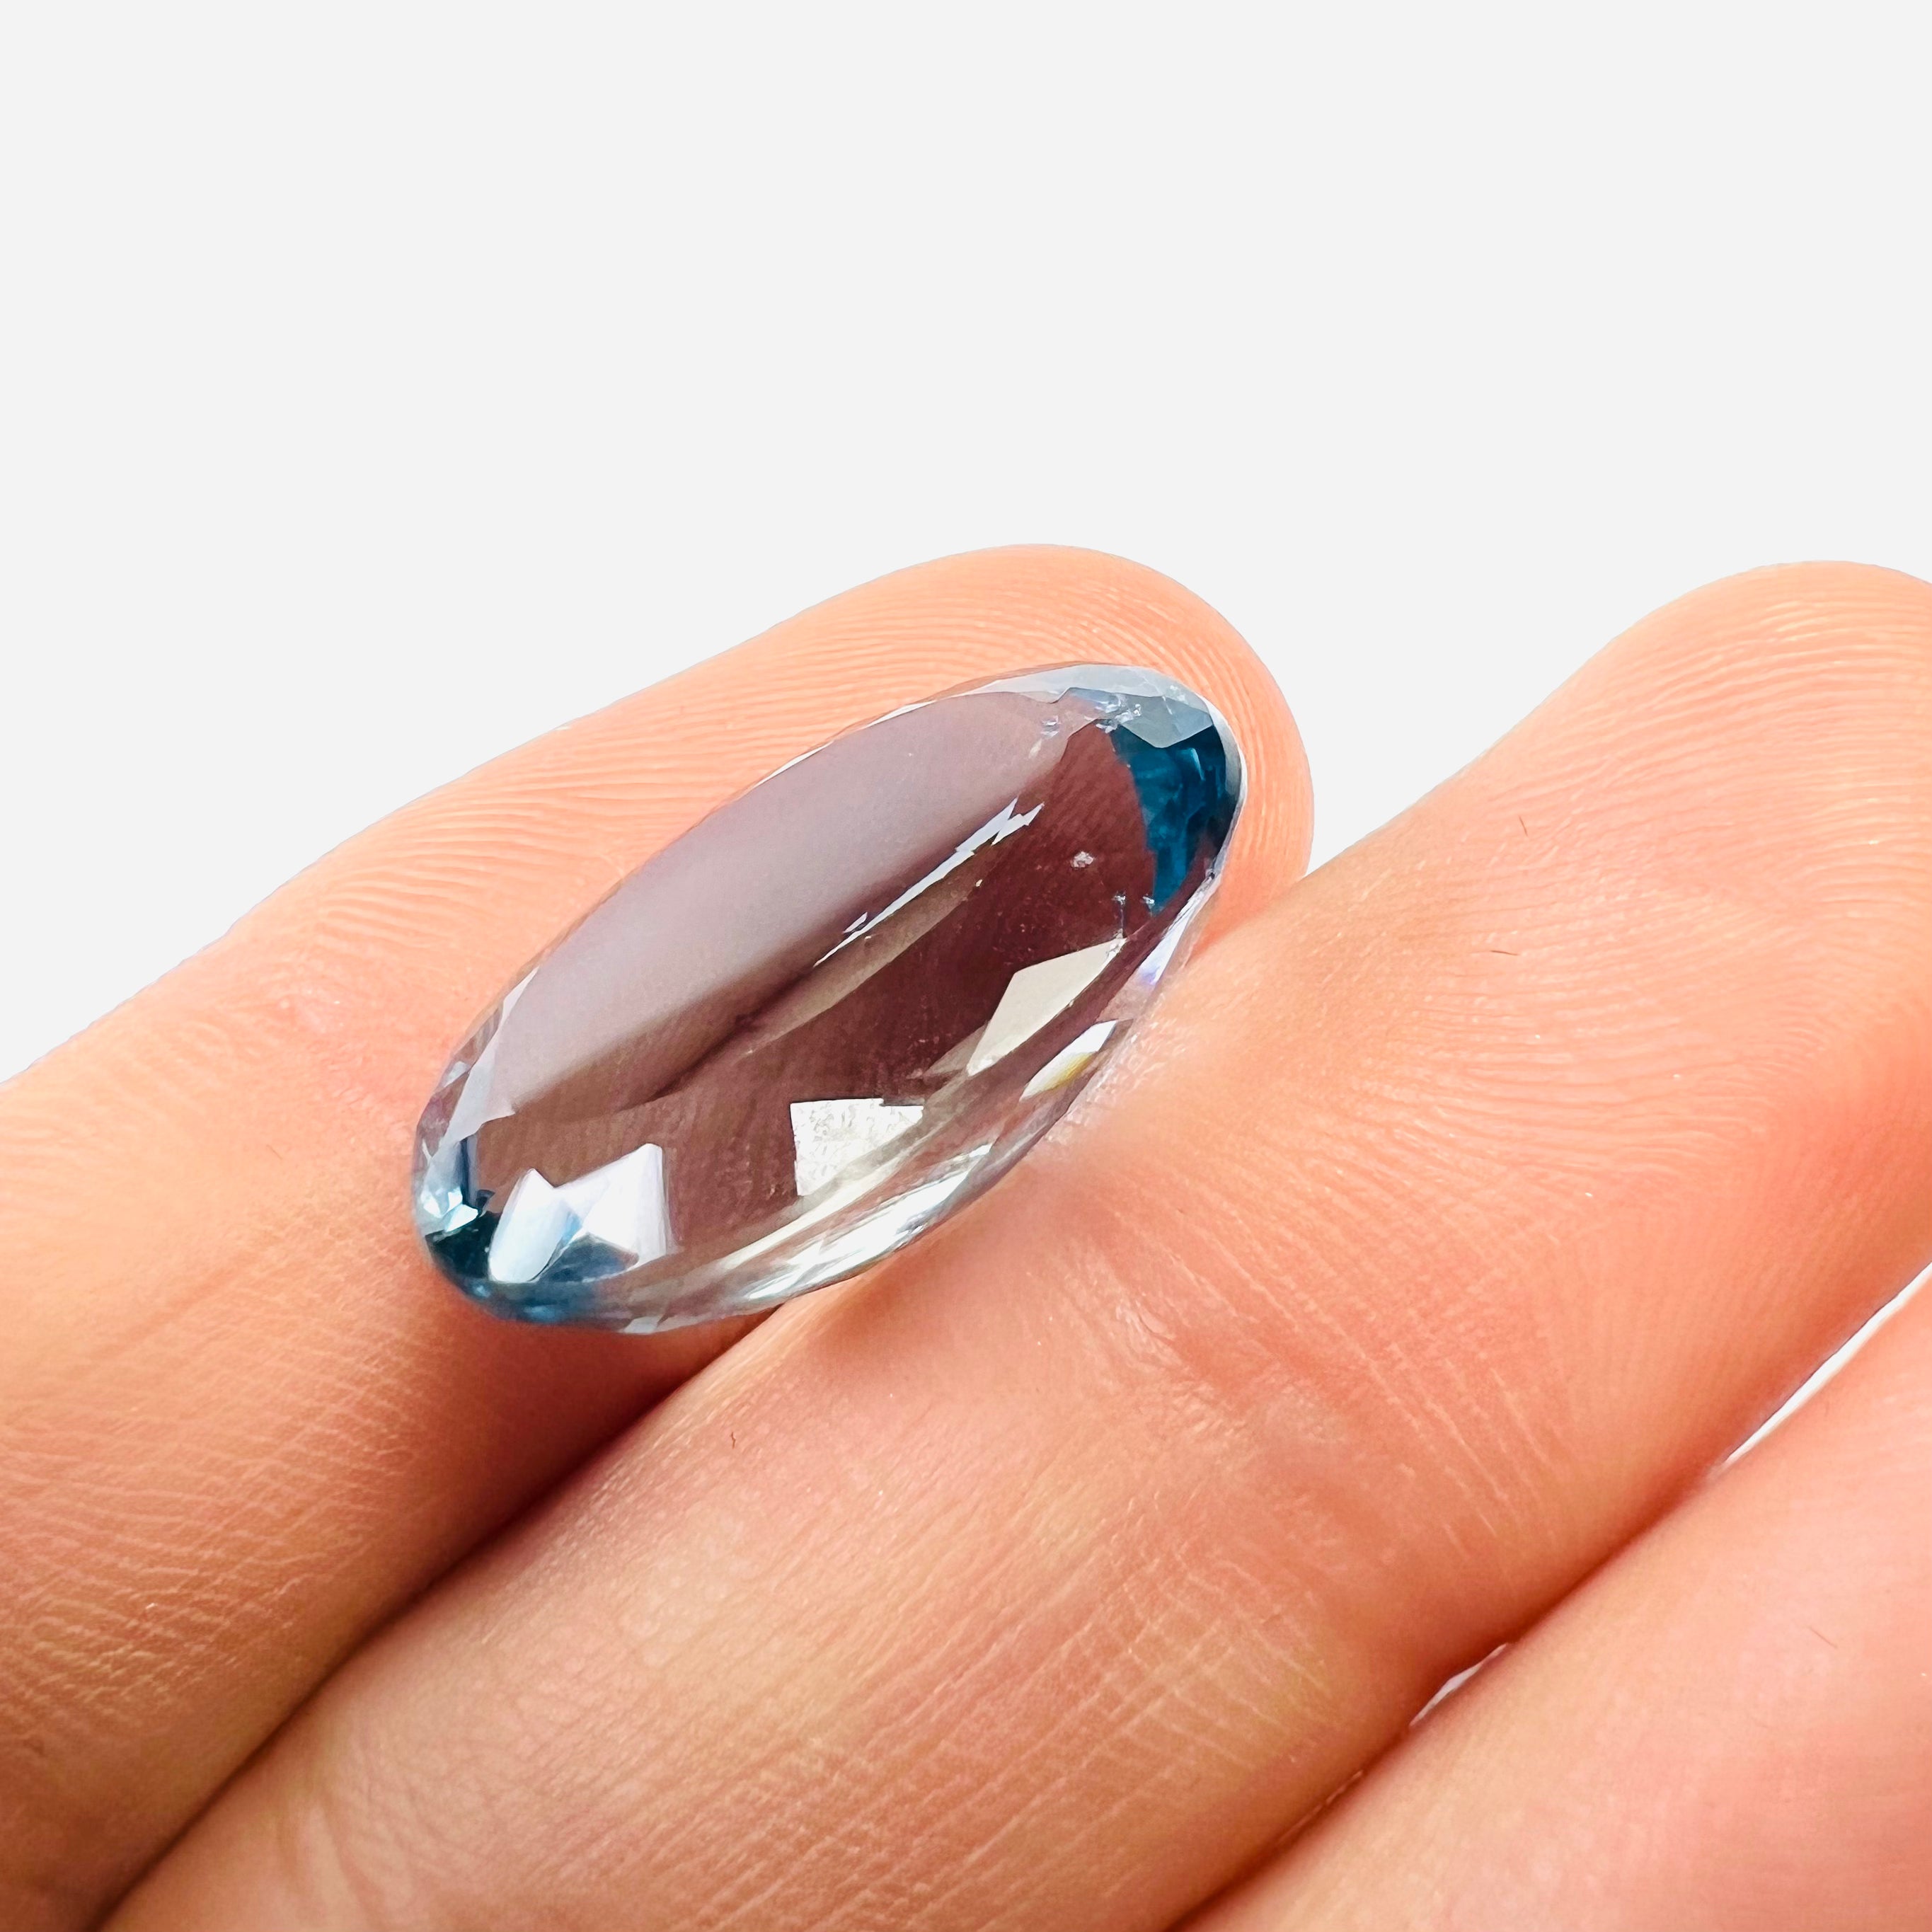 21.5CTW Loose Natural Oval Cut Topaz 20x14x9mm Earth mined Gemstone